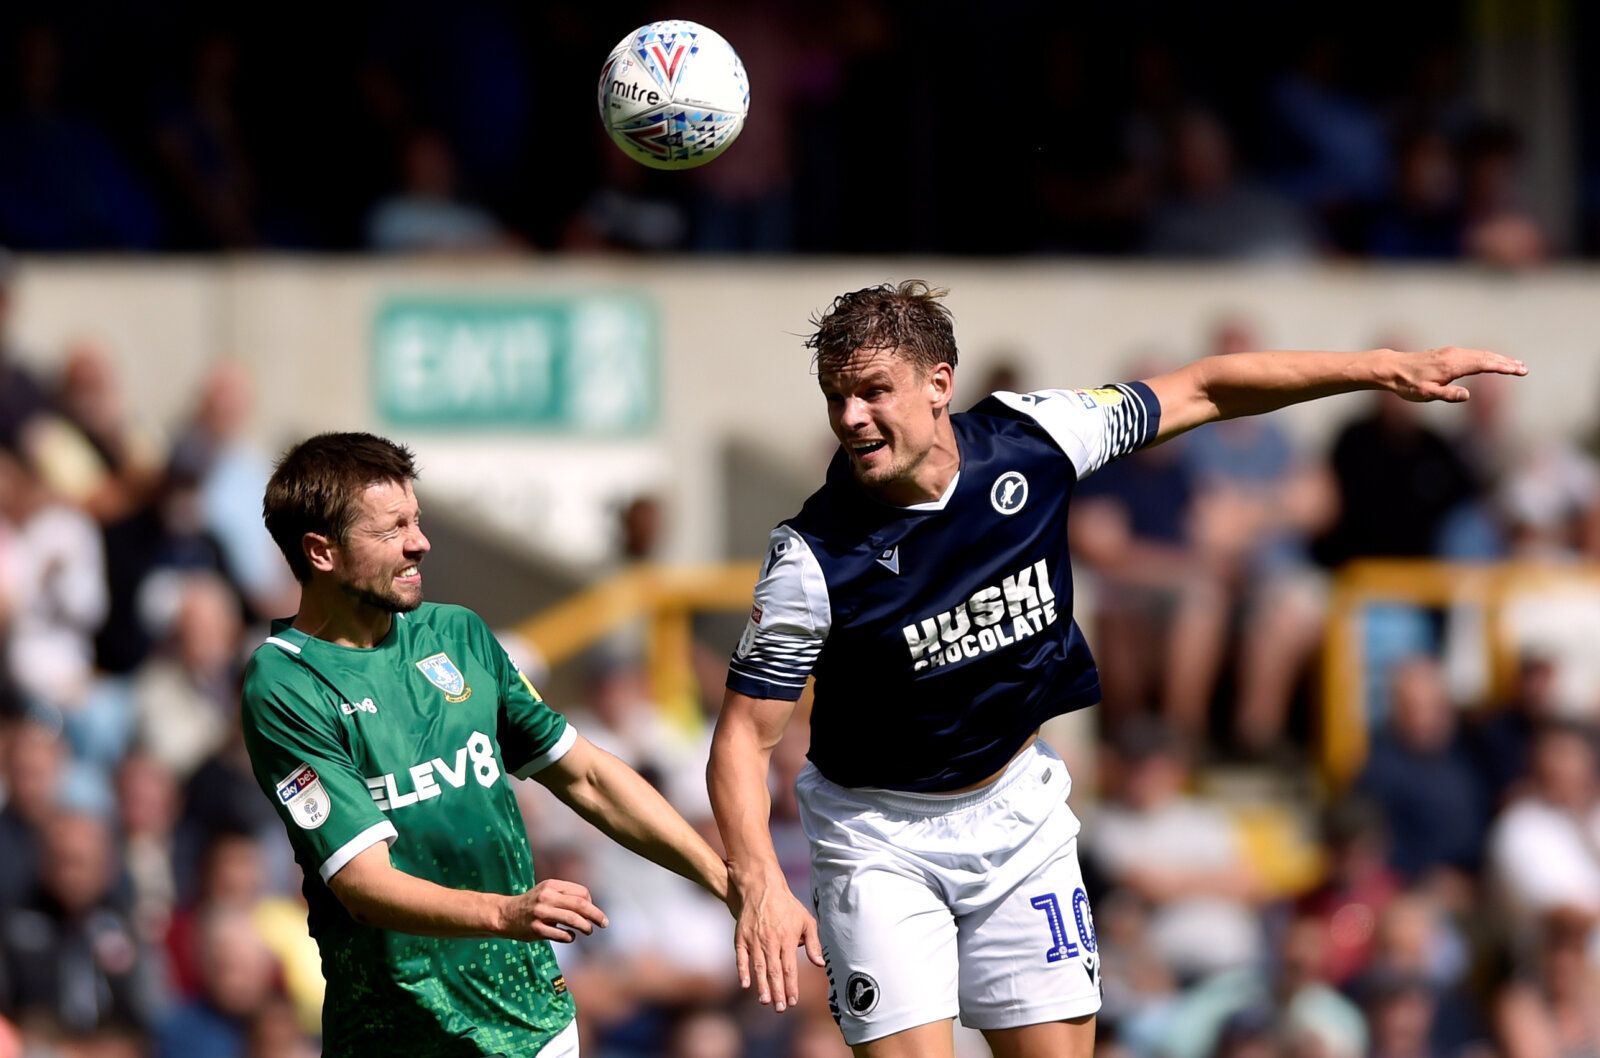 Soccer Football - Championship - Millwall v Sheffield Wednesday - The Den, London, Britain - August 17, 2019  Sheffield Wednesday's Julian Borner in action with Millwall's Matt Smith  Action Images/Adam Holt  EDITORIAL USE ONLY. No use with unauthorized audio, video, data, fixture lists, club/league logos or 